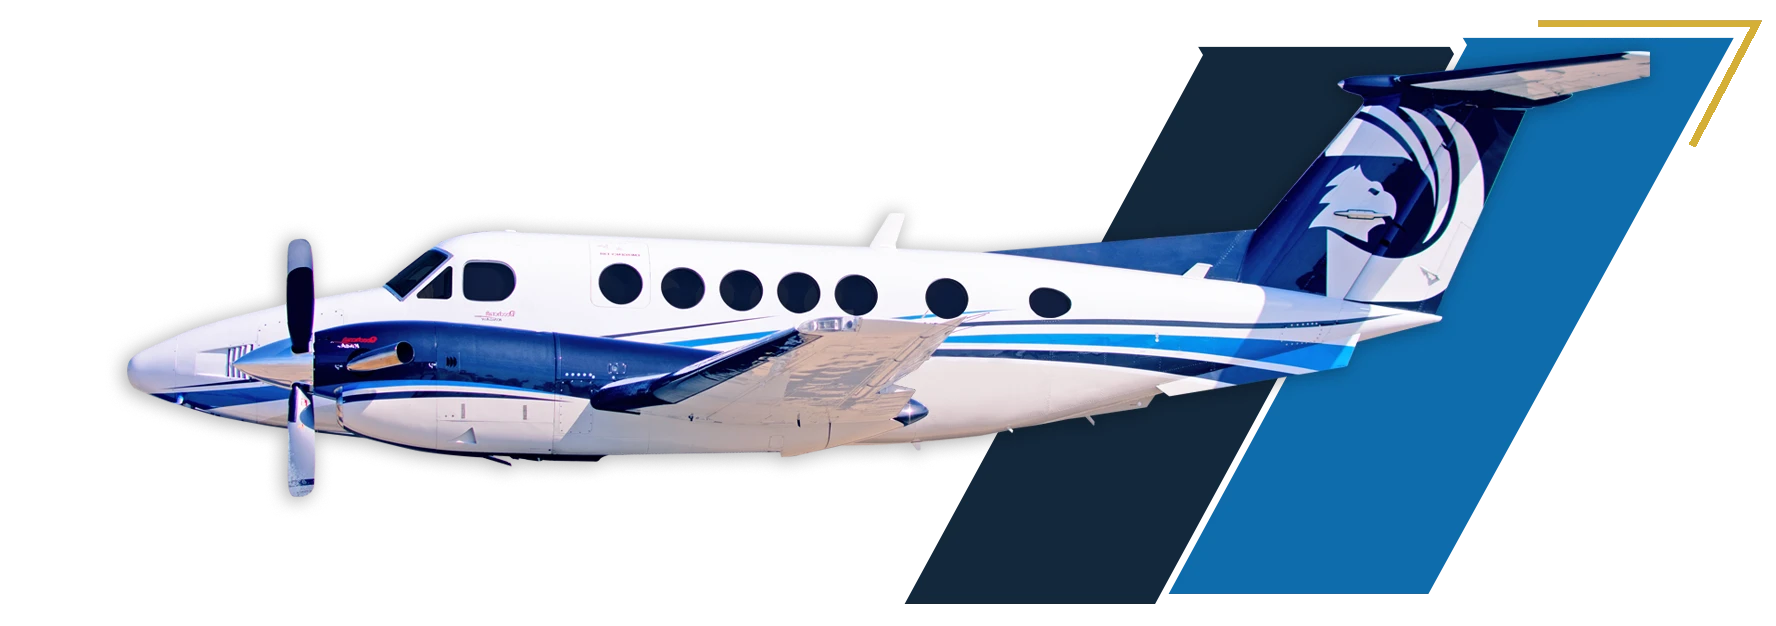 Griffing Flying Service - Port Clinton, OH - Private Charter Jet/Plane service to the Lake Erie Islands or over 4,000 destinations in the US & Canada